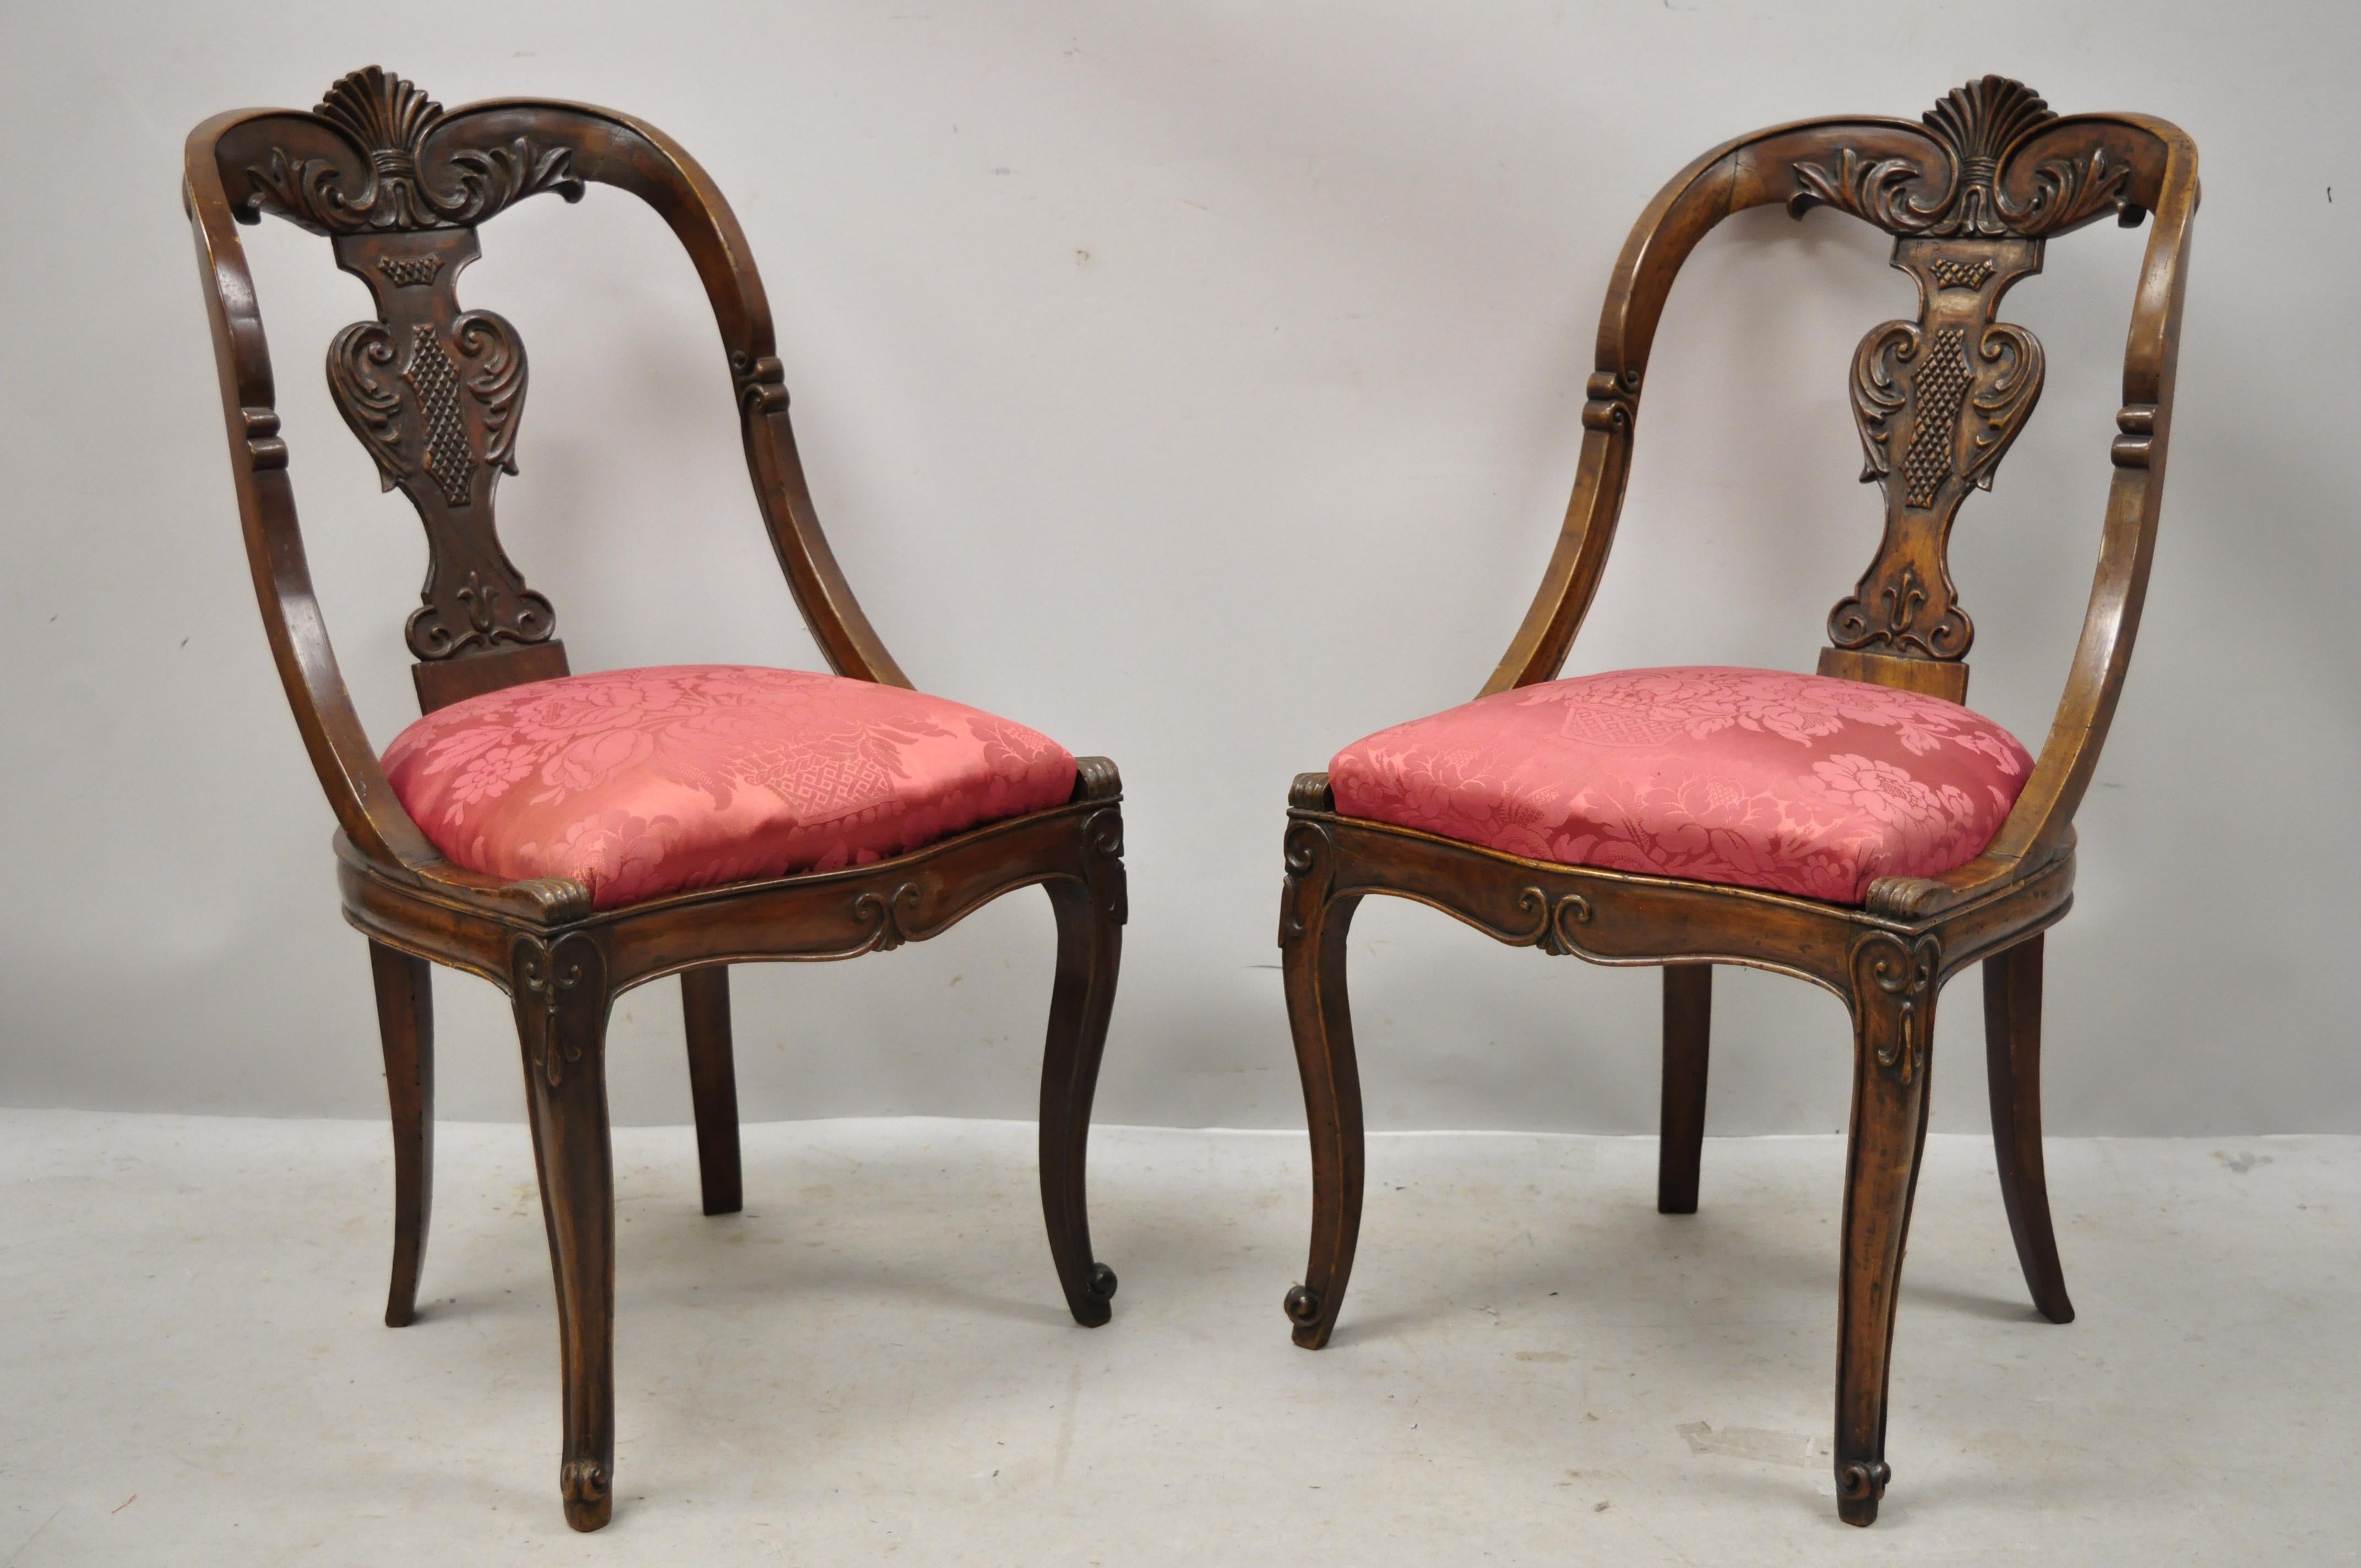 English Regency carved mahogany curved back dining side chairs - Set of 4. Set features drop seats, solid wood frames, nicely carved details, cabriole legs, very nice antique item, quality craftsmanship, circa late 19th century. Measurements: 35